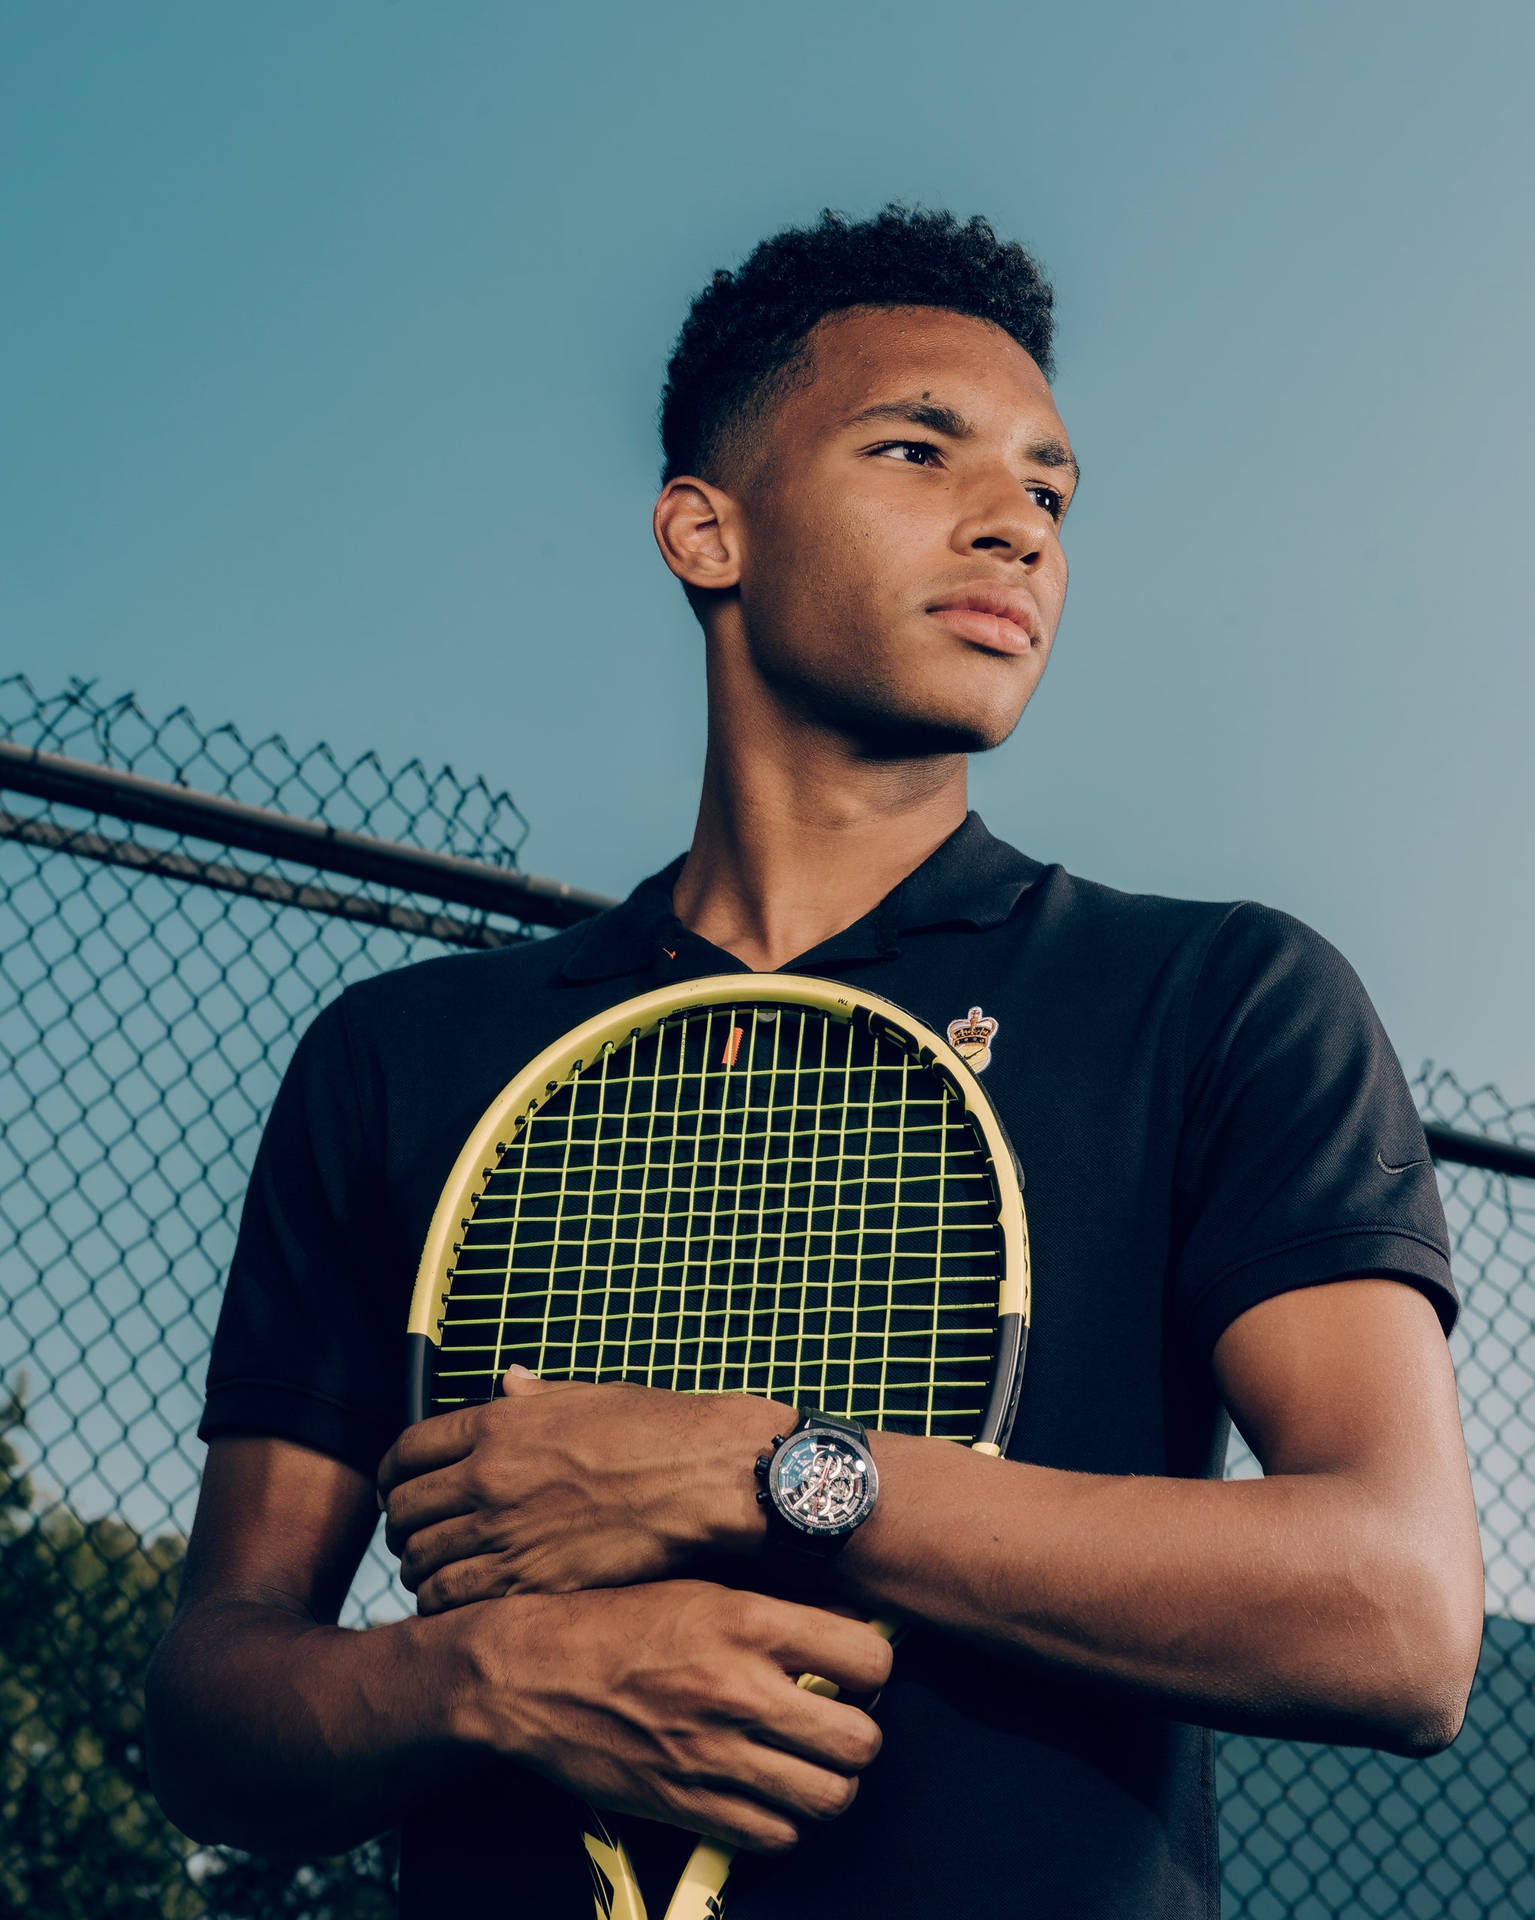 Felix Auger Aliassime in an intense moment, embracing his racket on court. Wallpaper